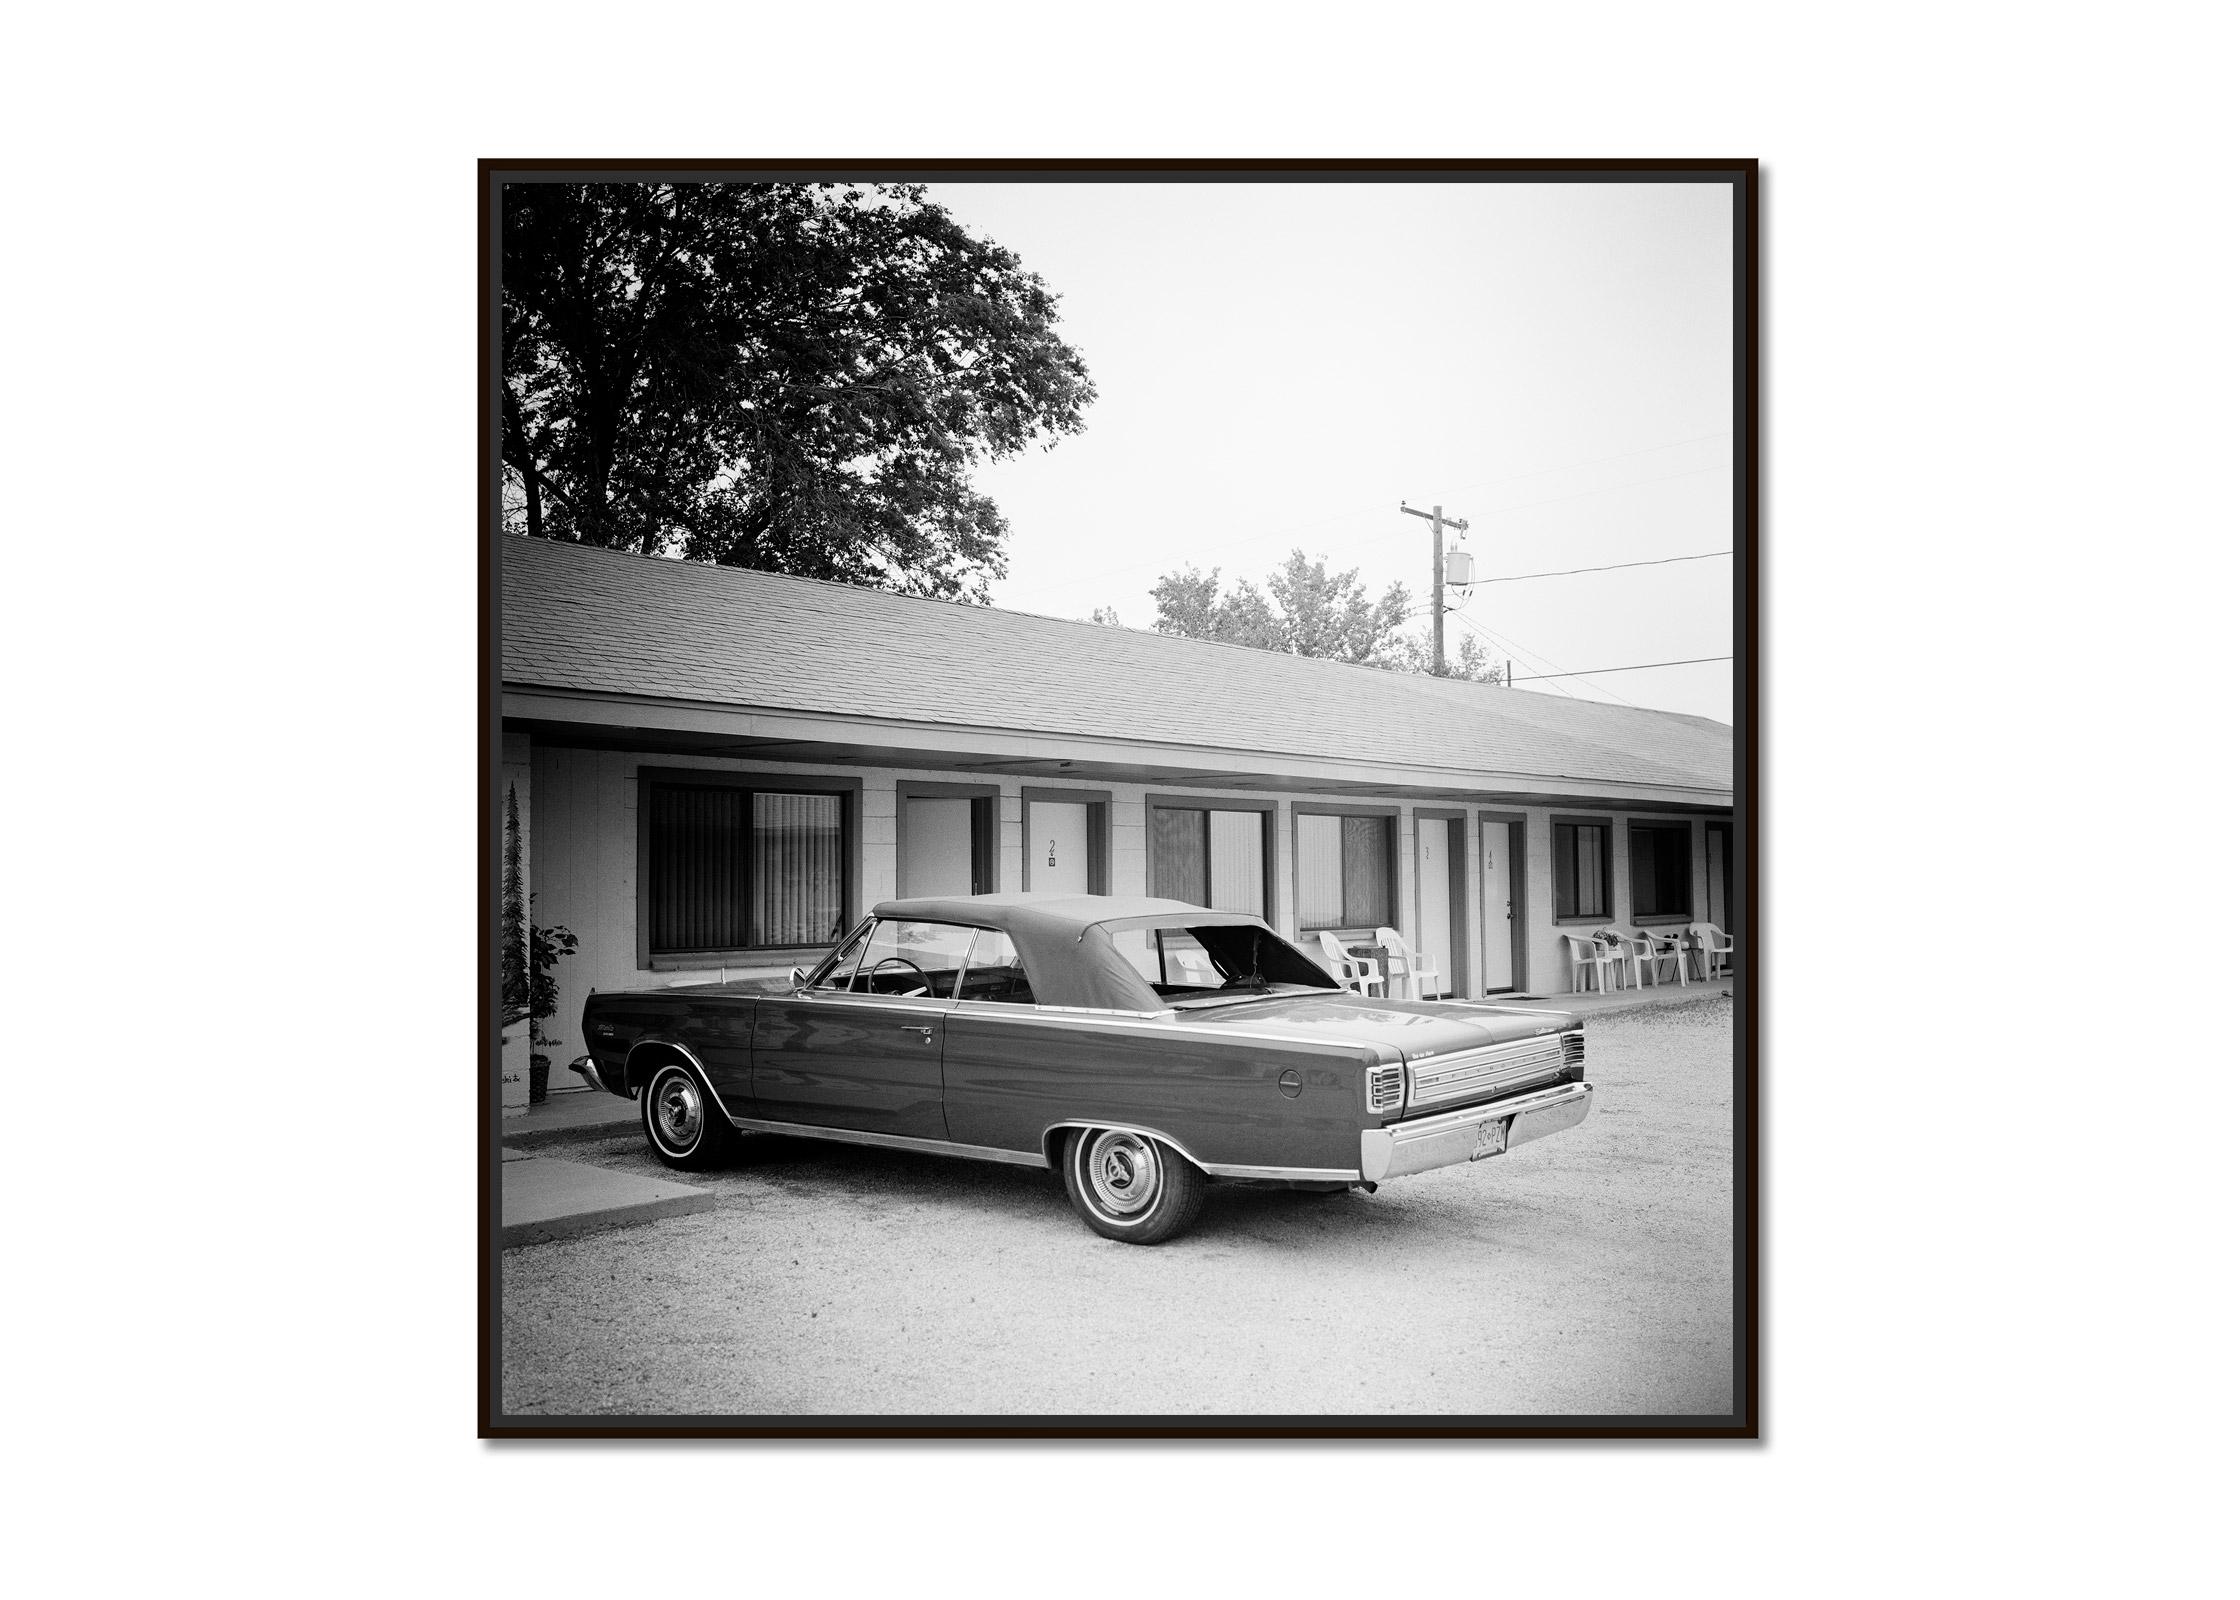 1967 Plymouth, Oldtimer, Route 66, USA, black white art landscape photography - Photograph by Gerald Berghammer